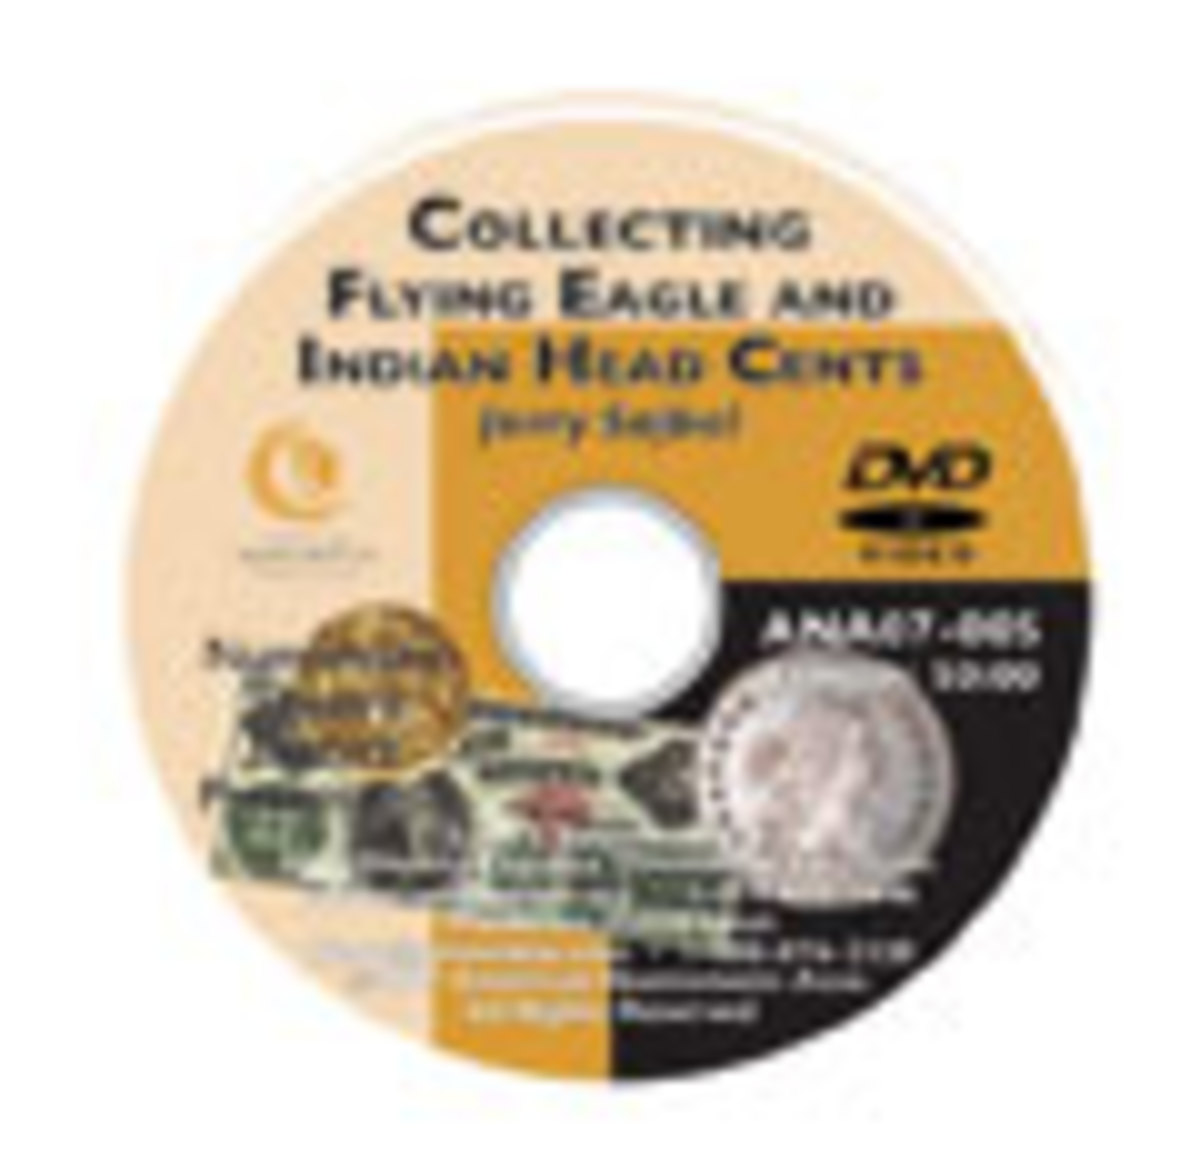 Collecting Flying Eagle and Indian Head Cents